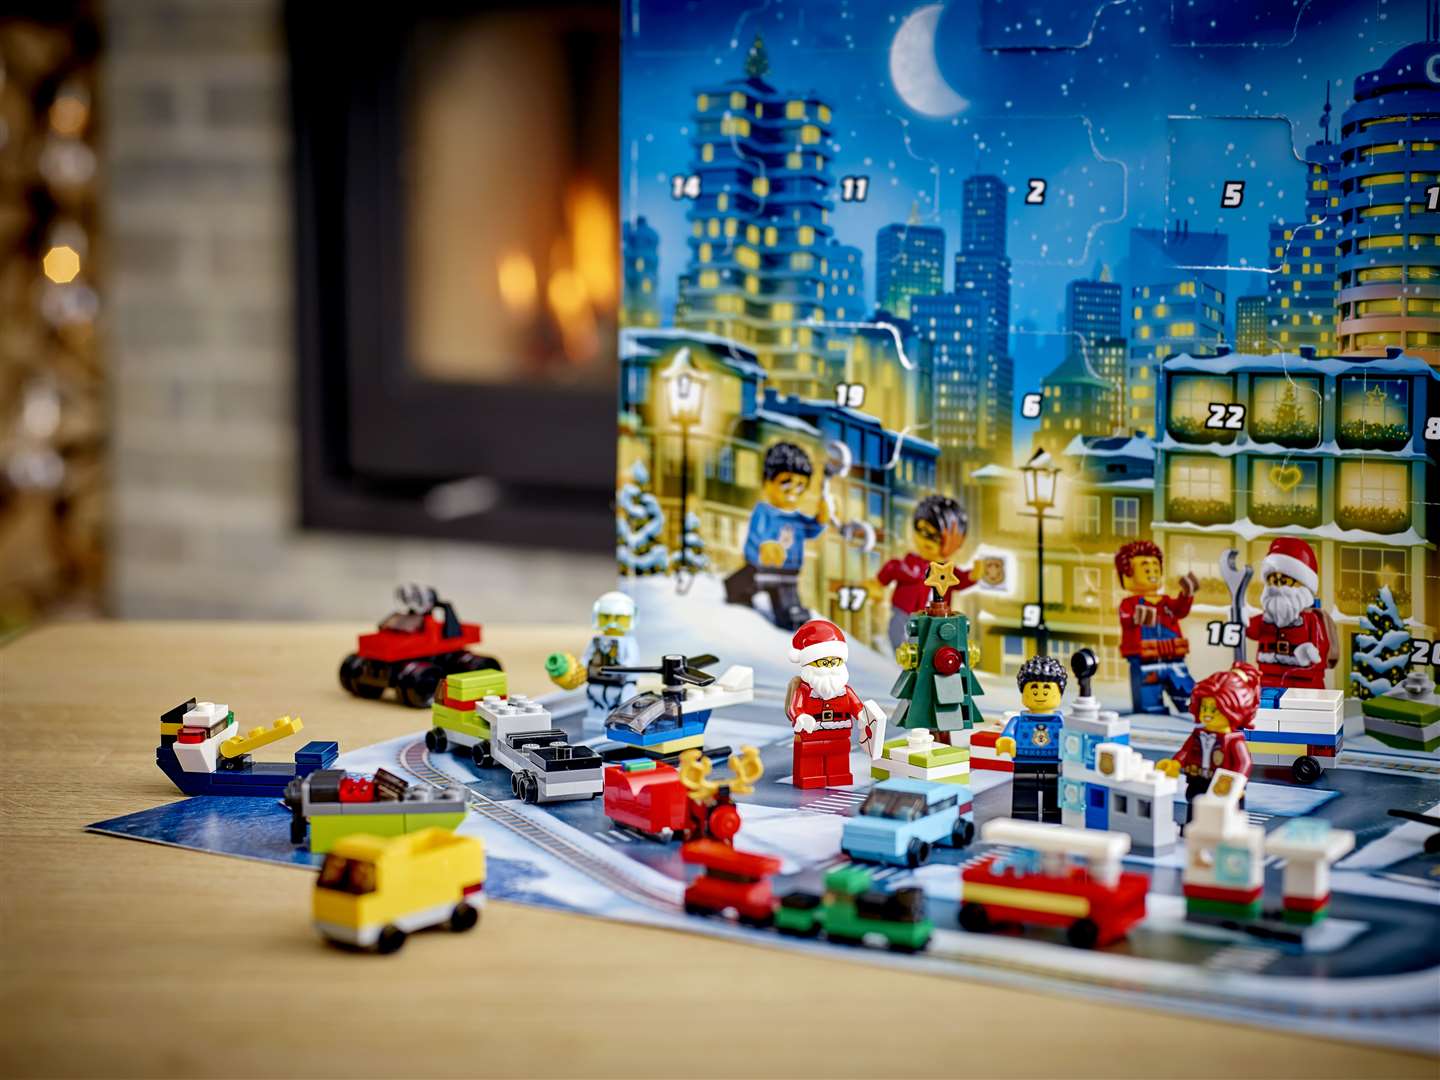 LEGO City is due for release on September 25